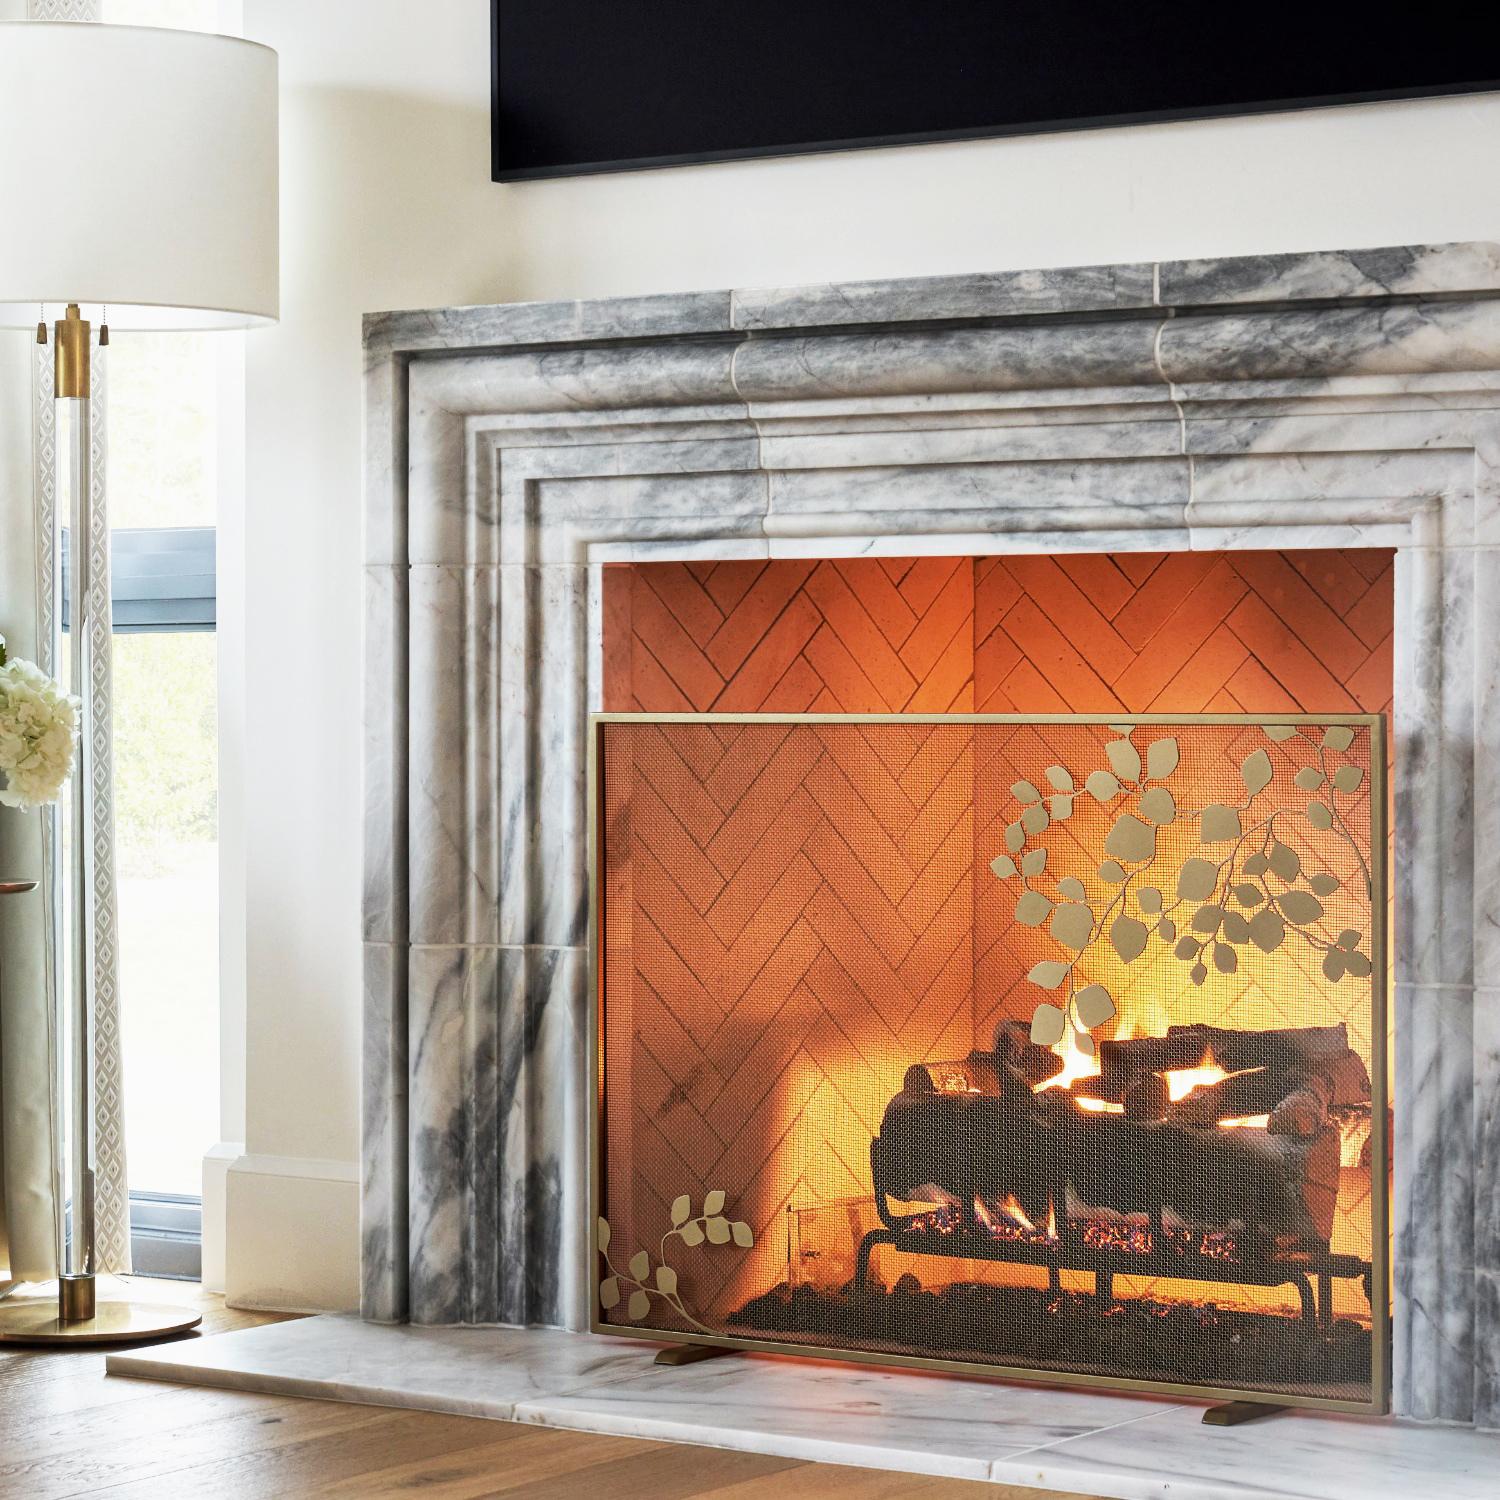 It’s a short life. Why not live it in full bloom? The Eucalyptus Fire Screen adds a compelling visual layer in front of the fireplace, bringing a touch of botanical texture and natural elegance into the room. Designed and built in Texas, made with